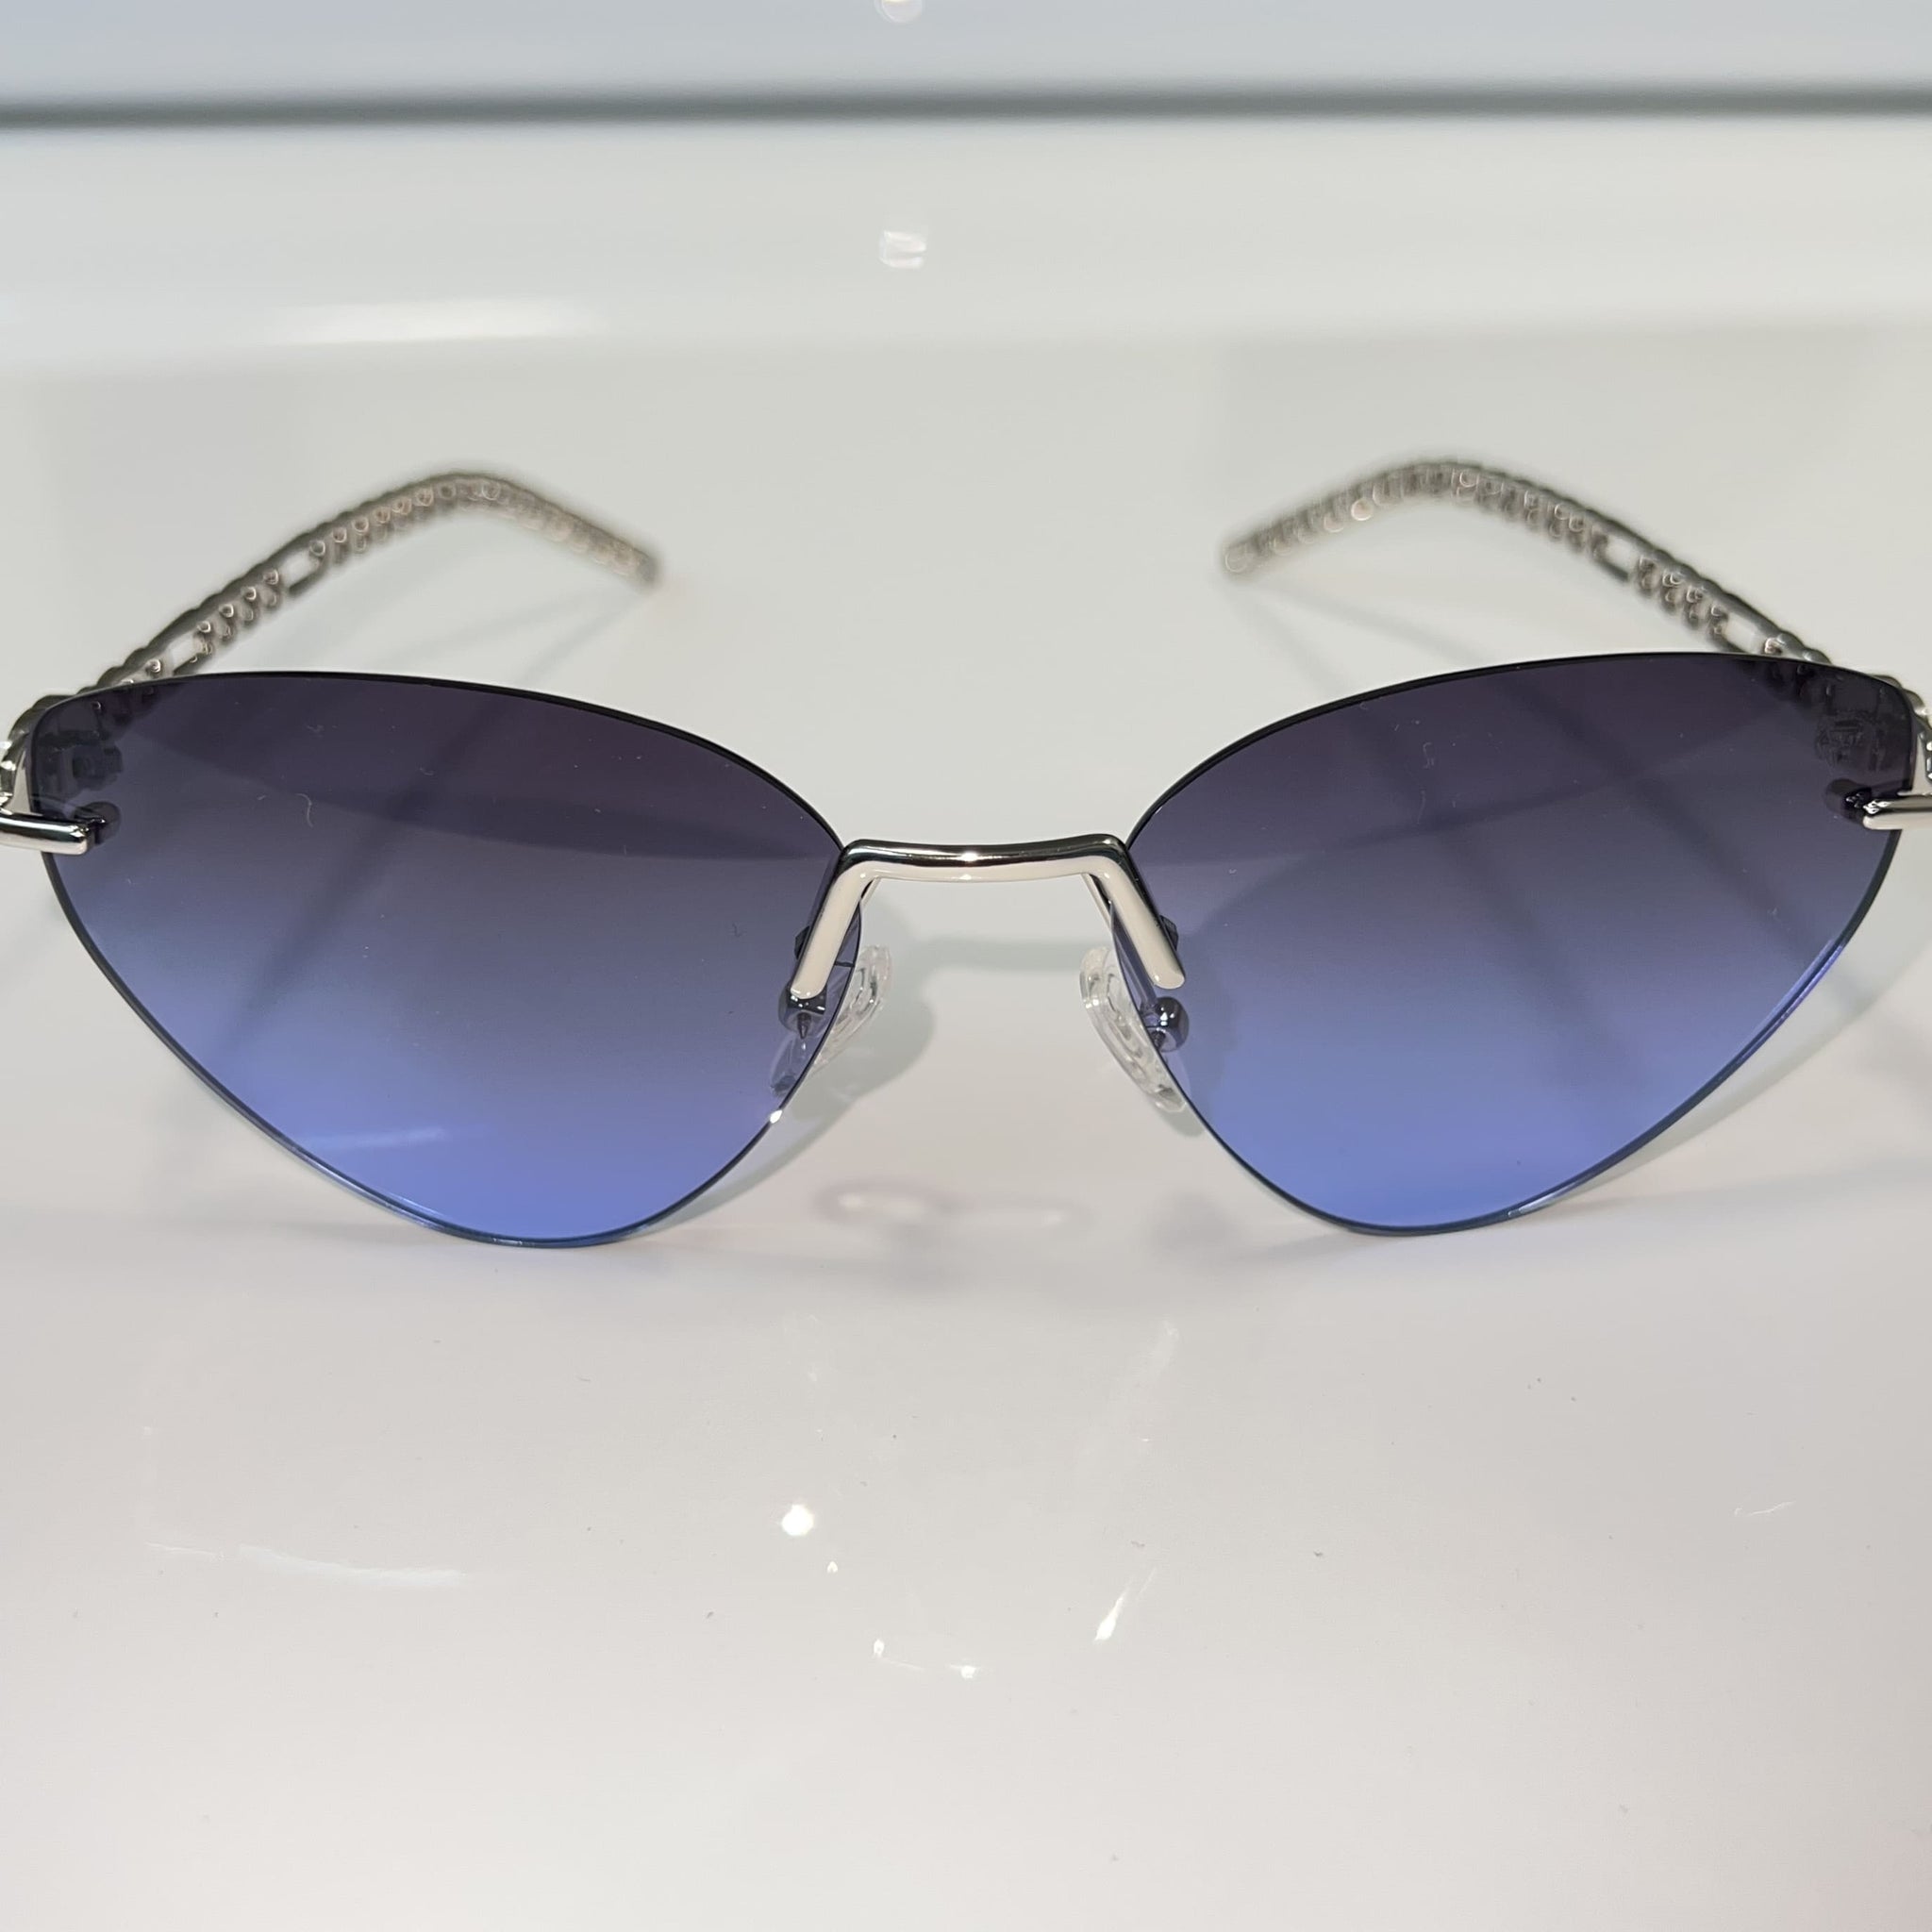 Pearl 'For Her' Glasses - Silver plated - Blue Shade - Sehgal Glasses